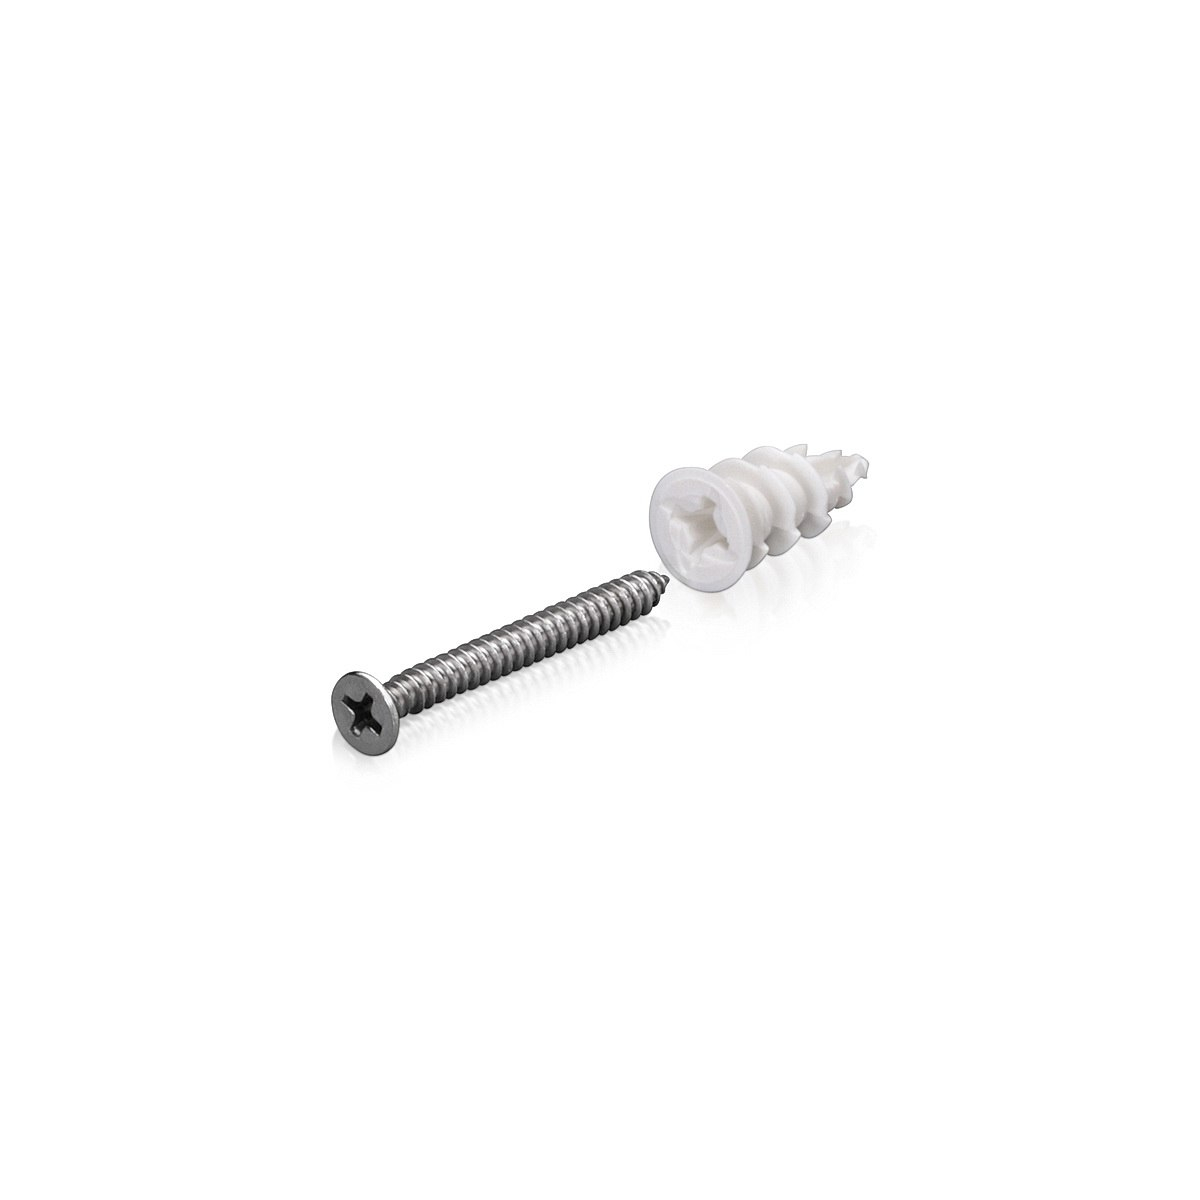 #6 Stainless Steel Screw and Nylon Anchor Package for Drywall